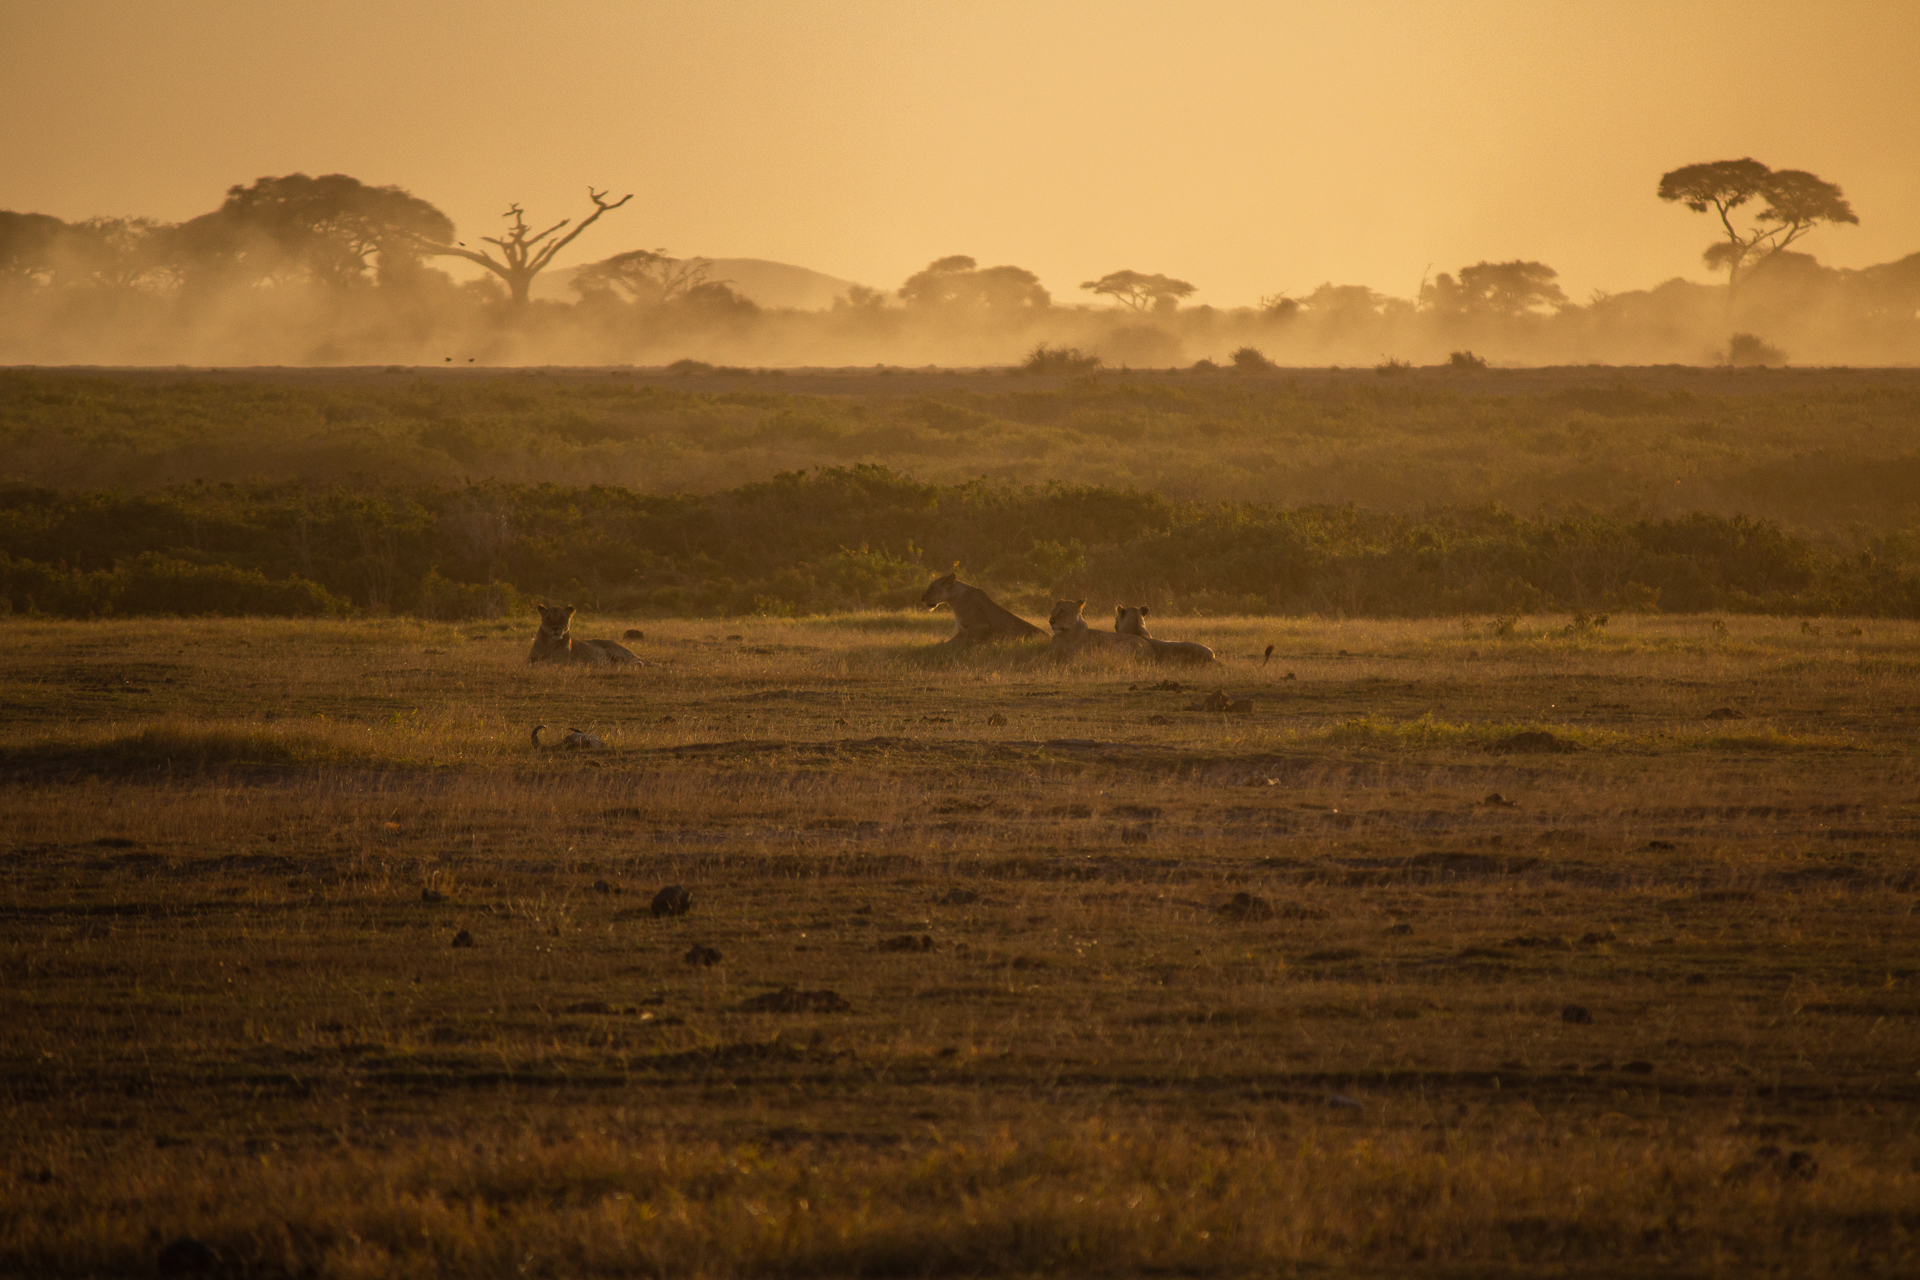 Lionesses at sunset...